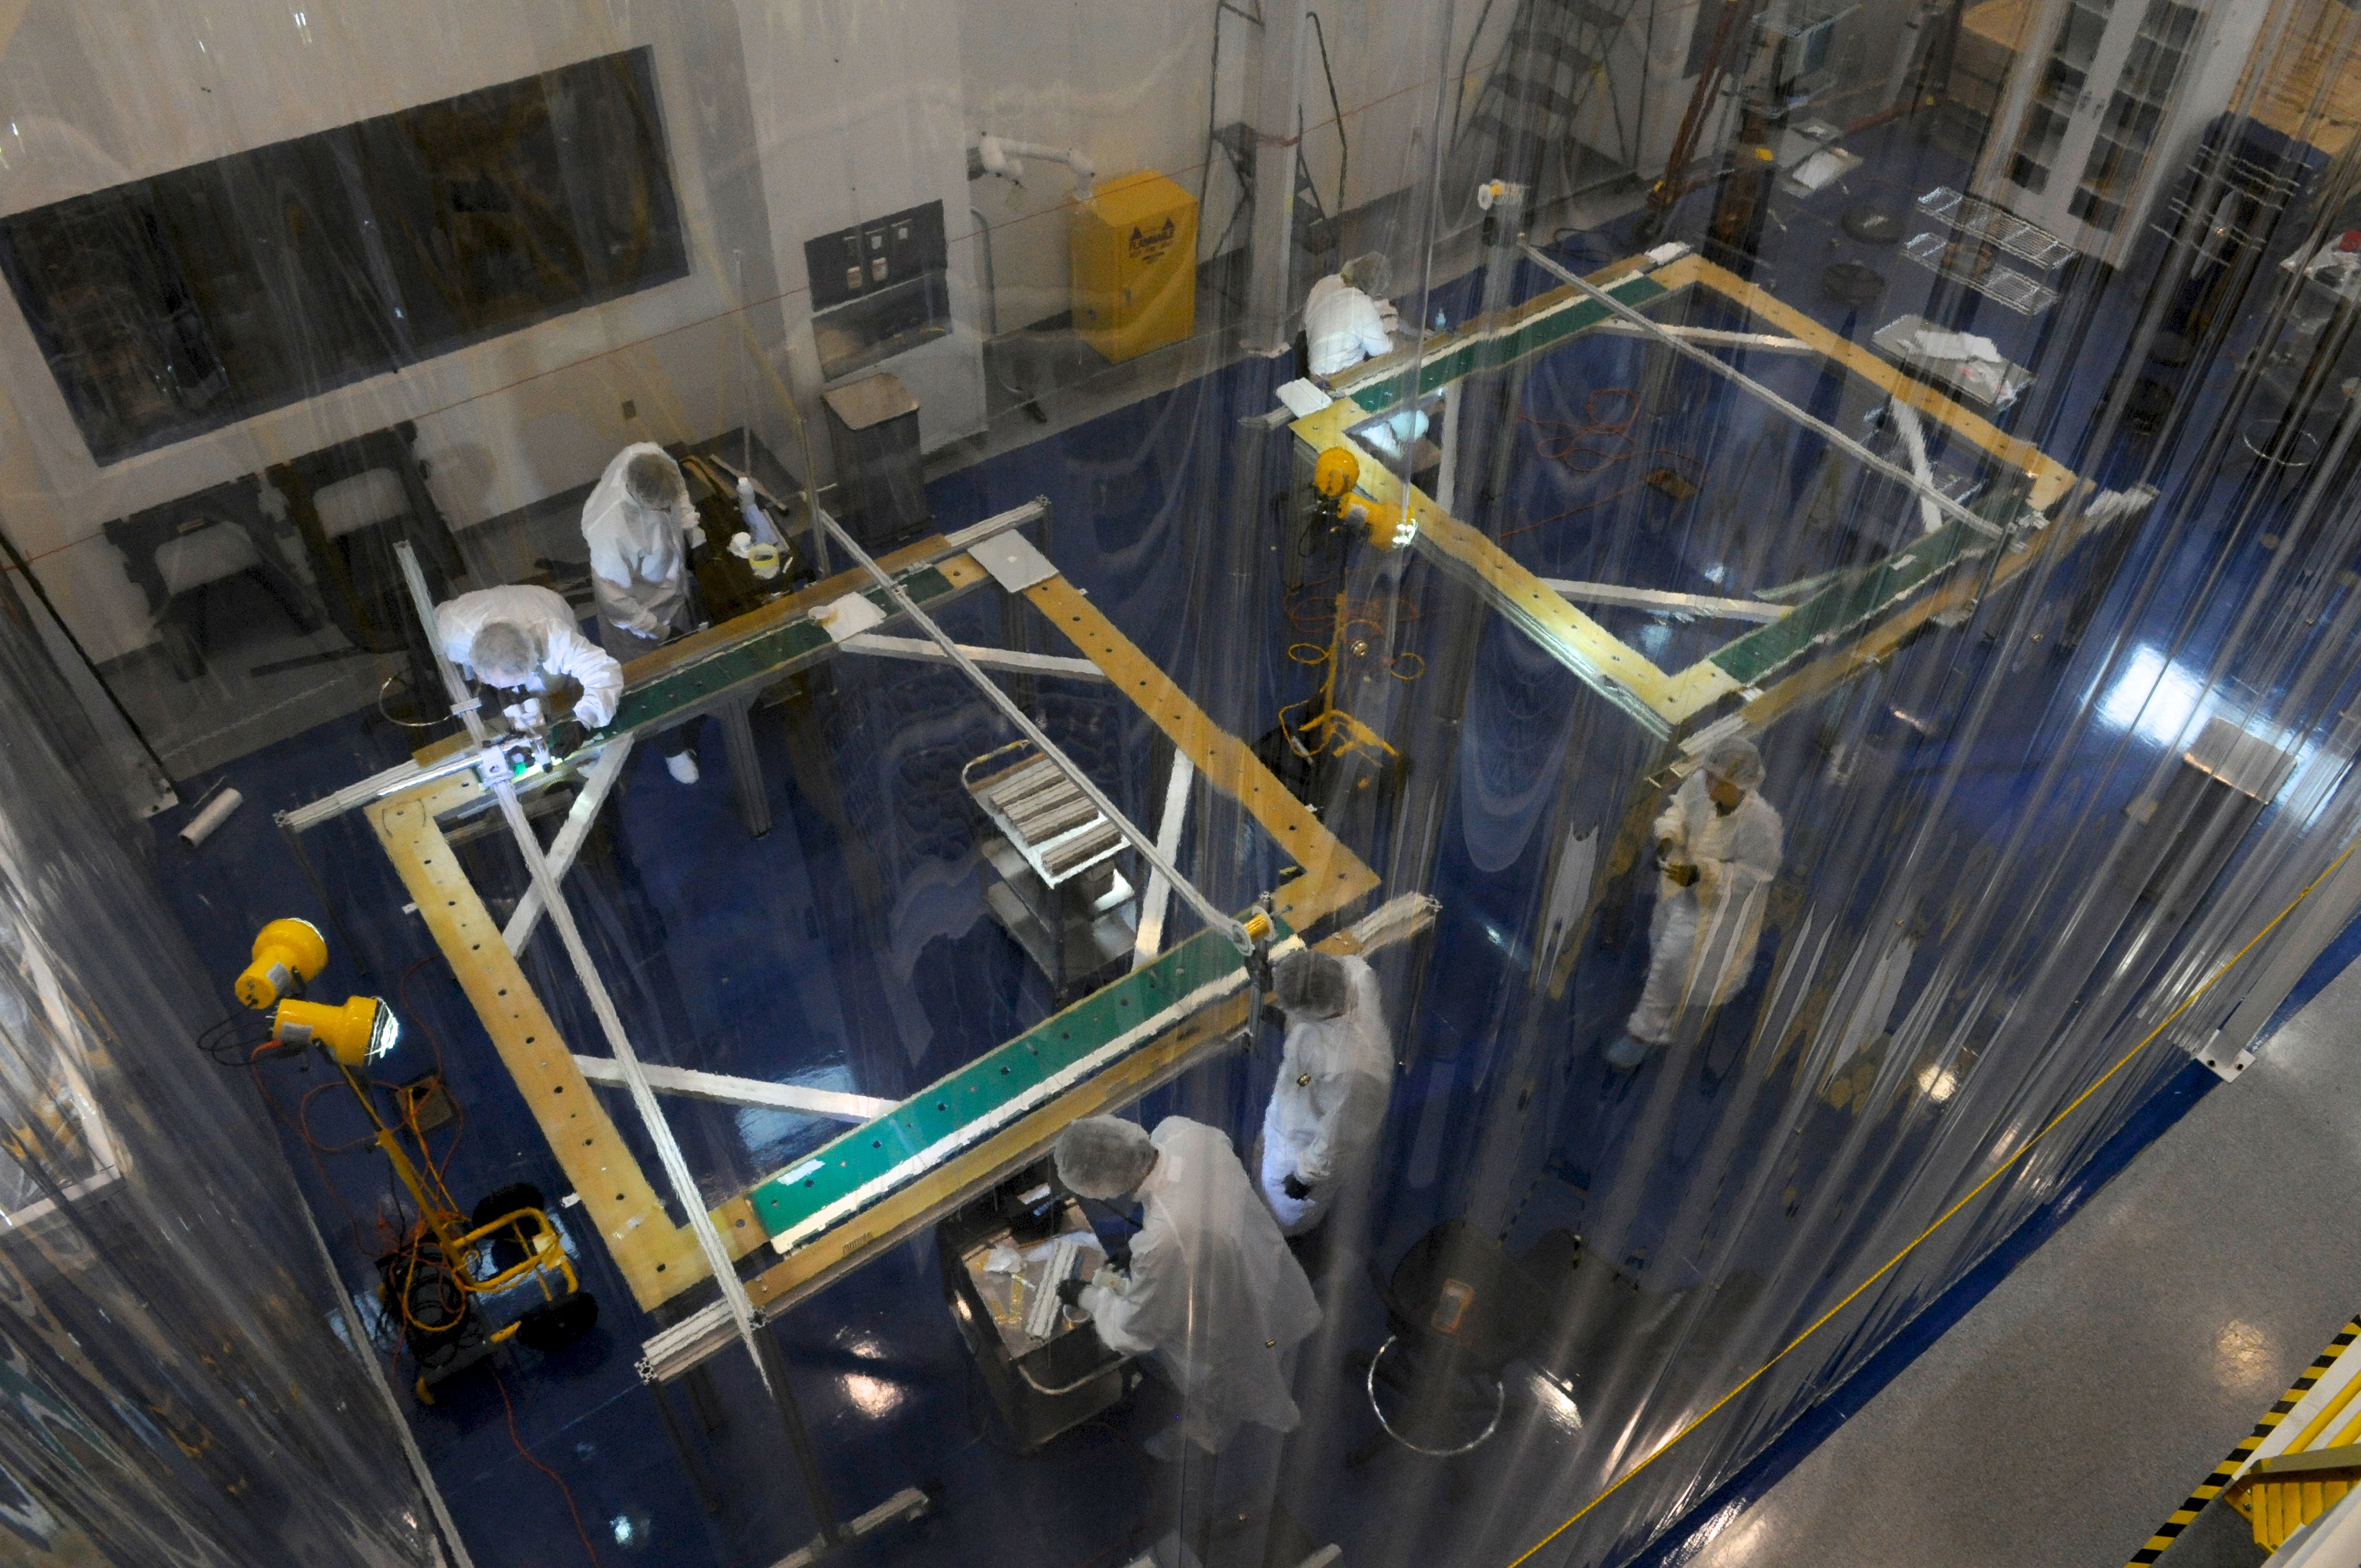 Photo of drift chamber construction in high bay lab